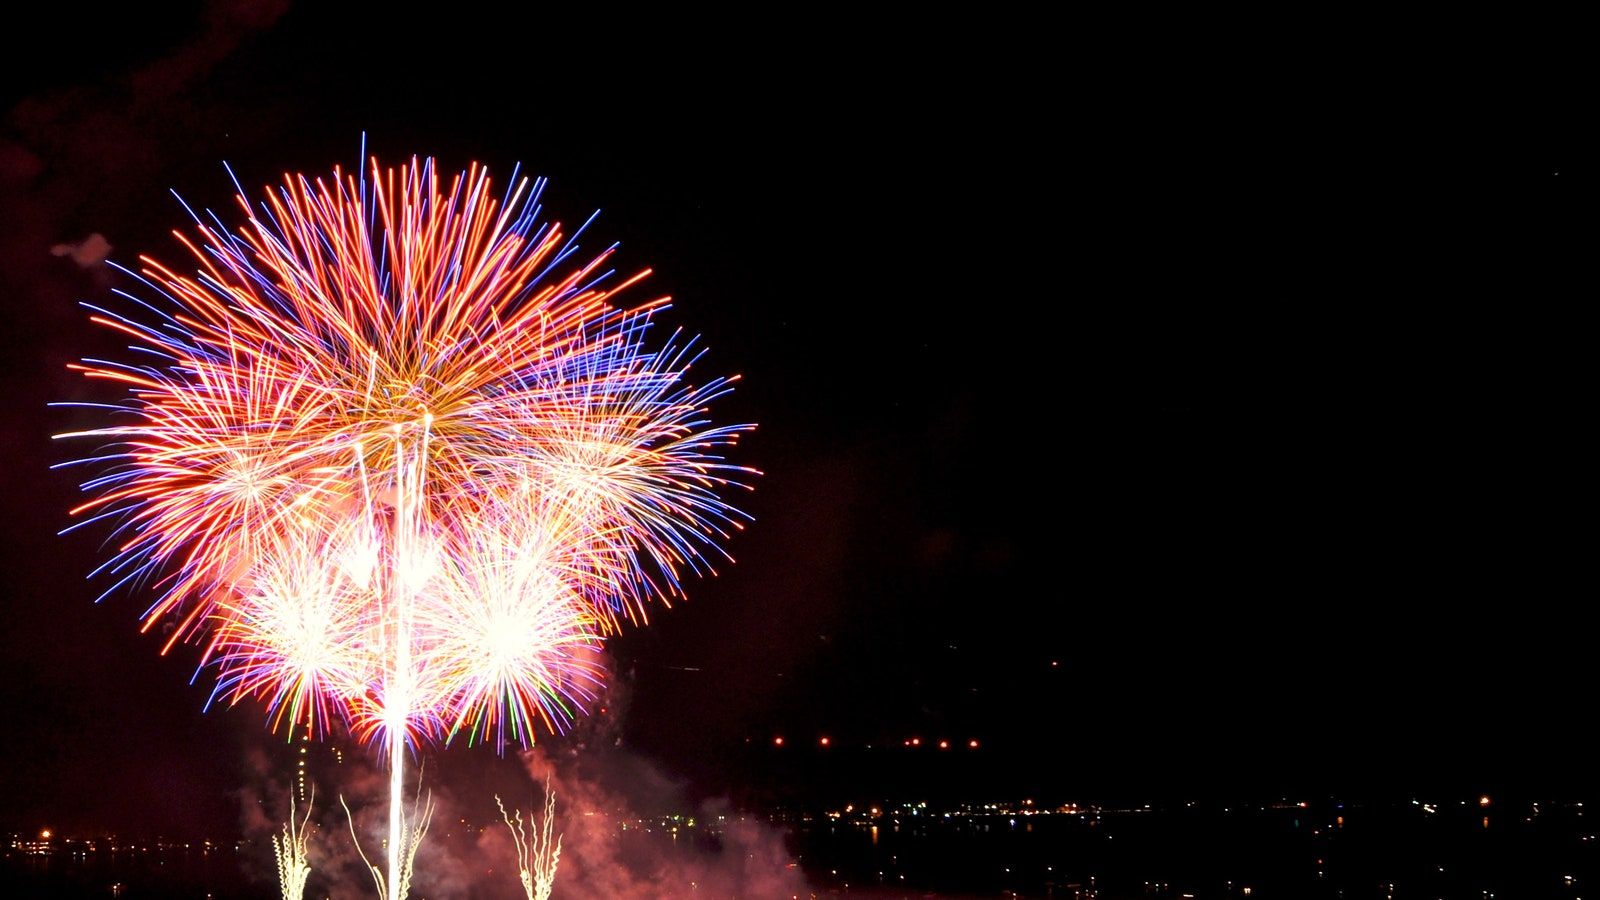 The Best 4th of July Fireworks in the USA. Condé Nast Traveler